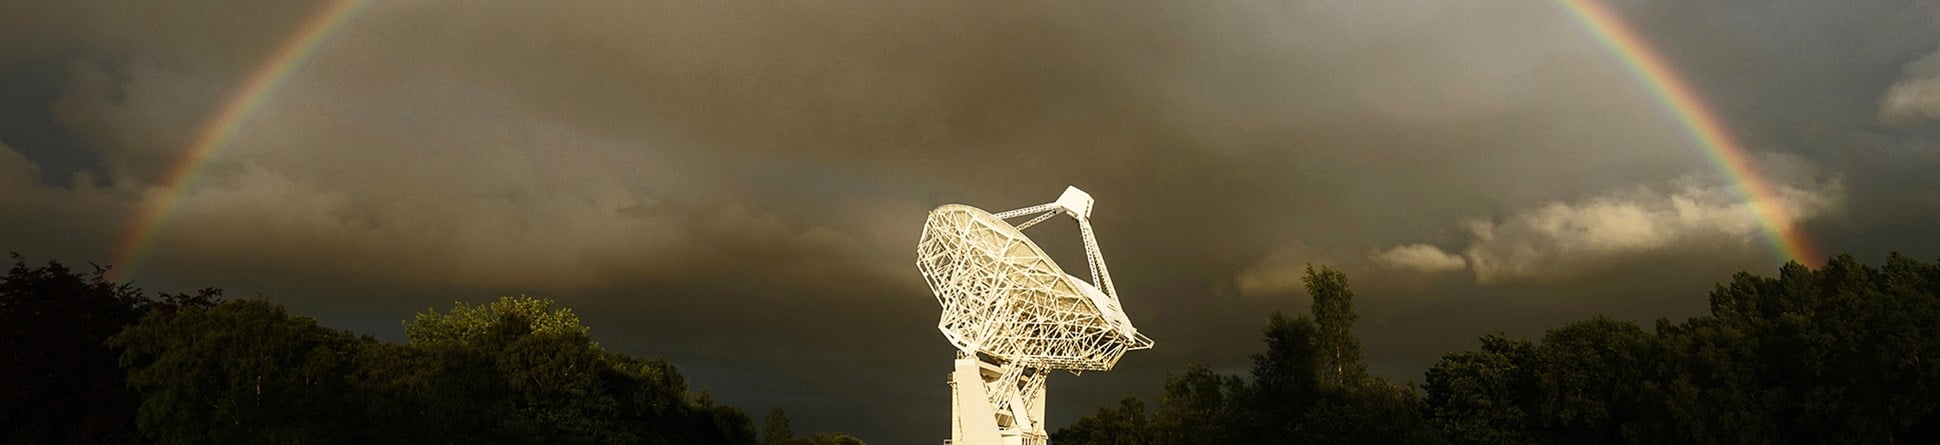 The Mark II Telescope at Jodrell Bank photographed against a moody sky encircled by a rainbow